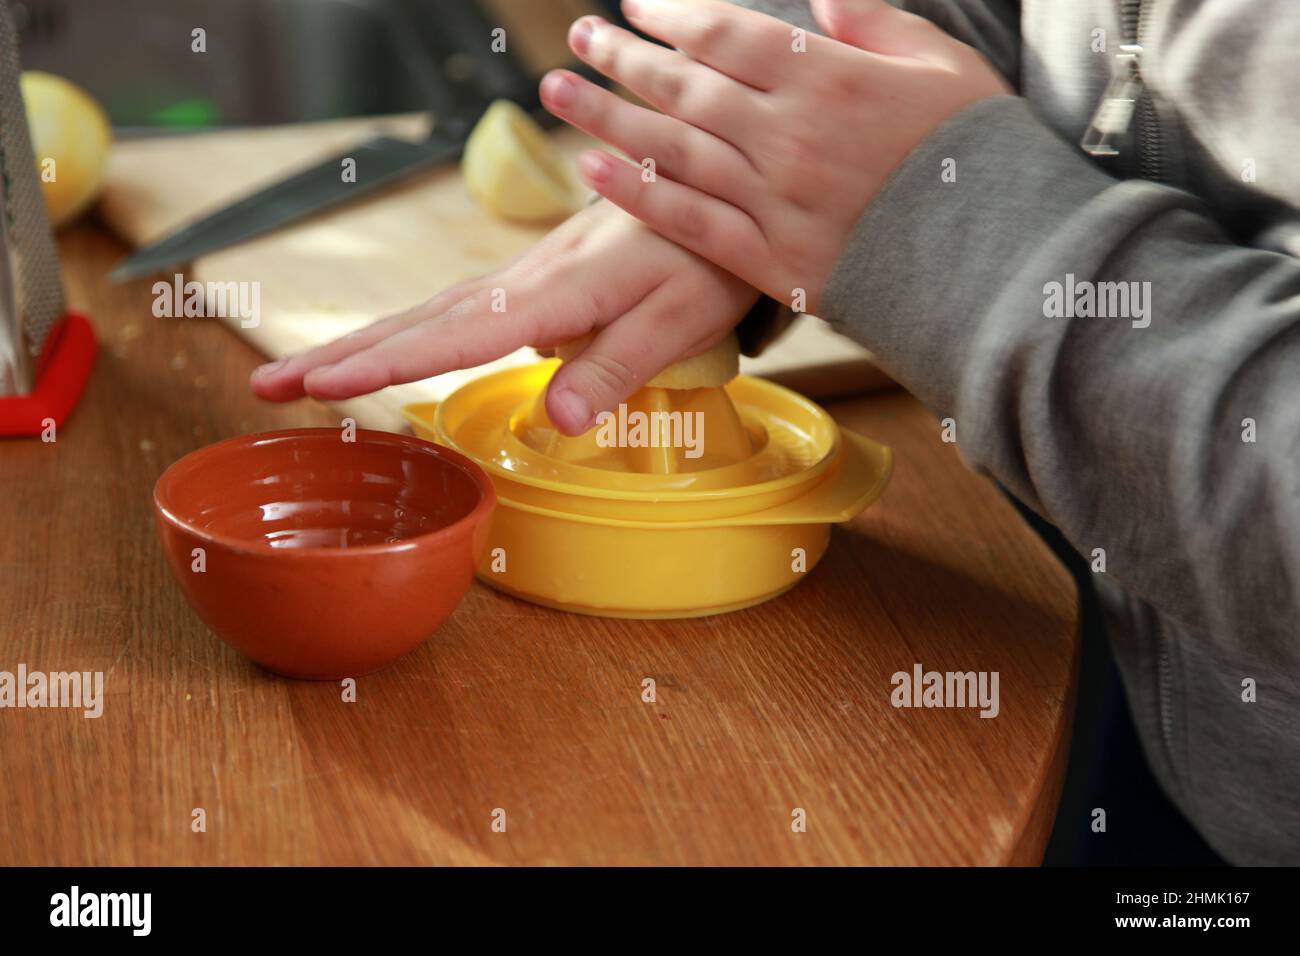 Close-uo of hands squeezing a lemon using a manual squeezer. Stock Photo